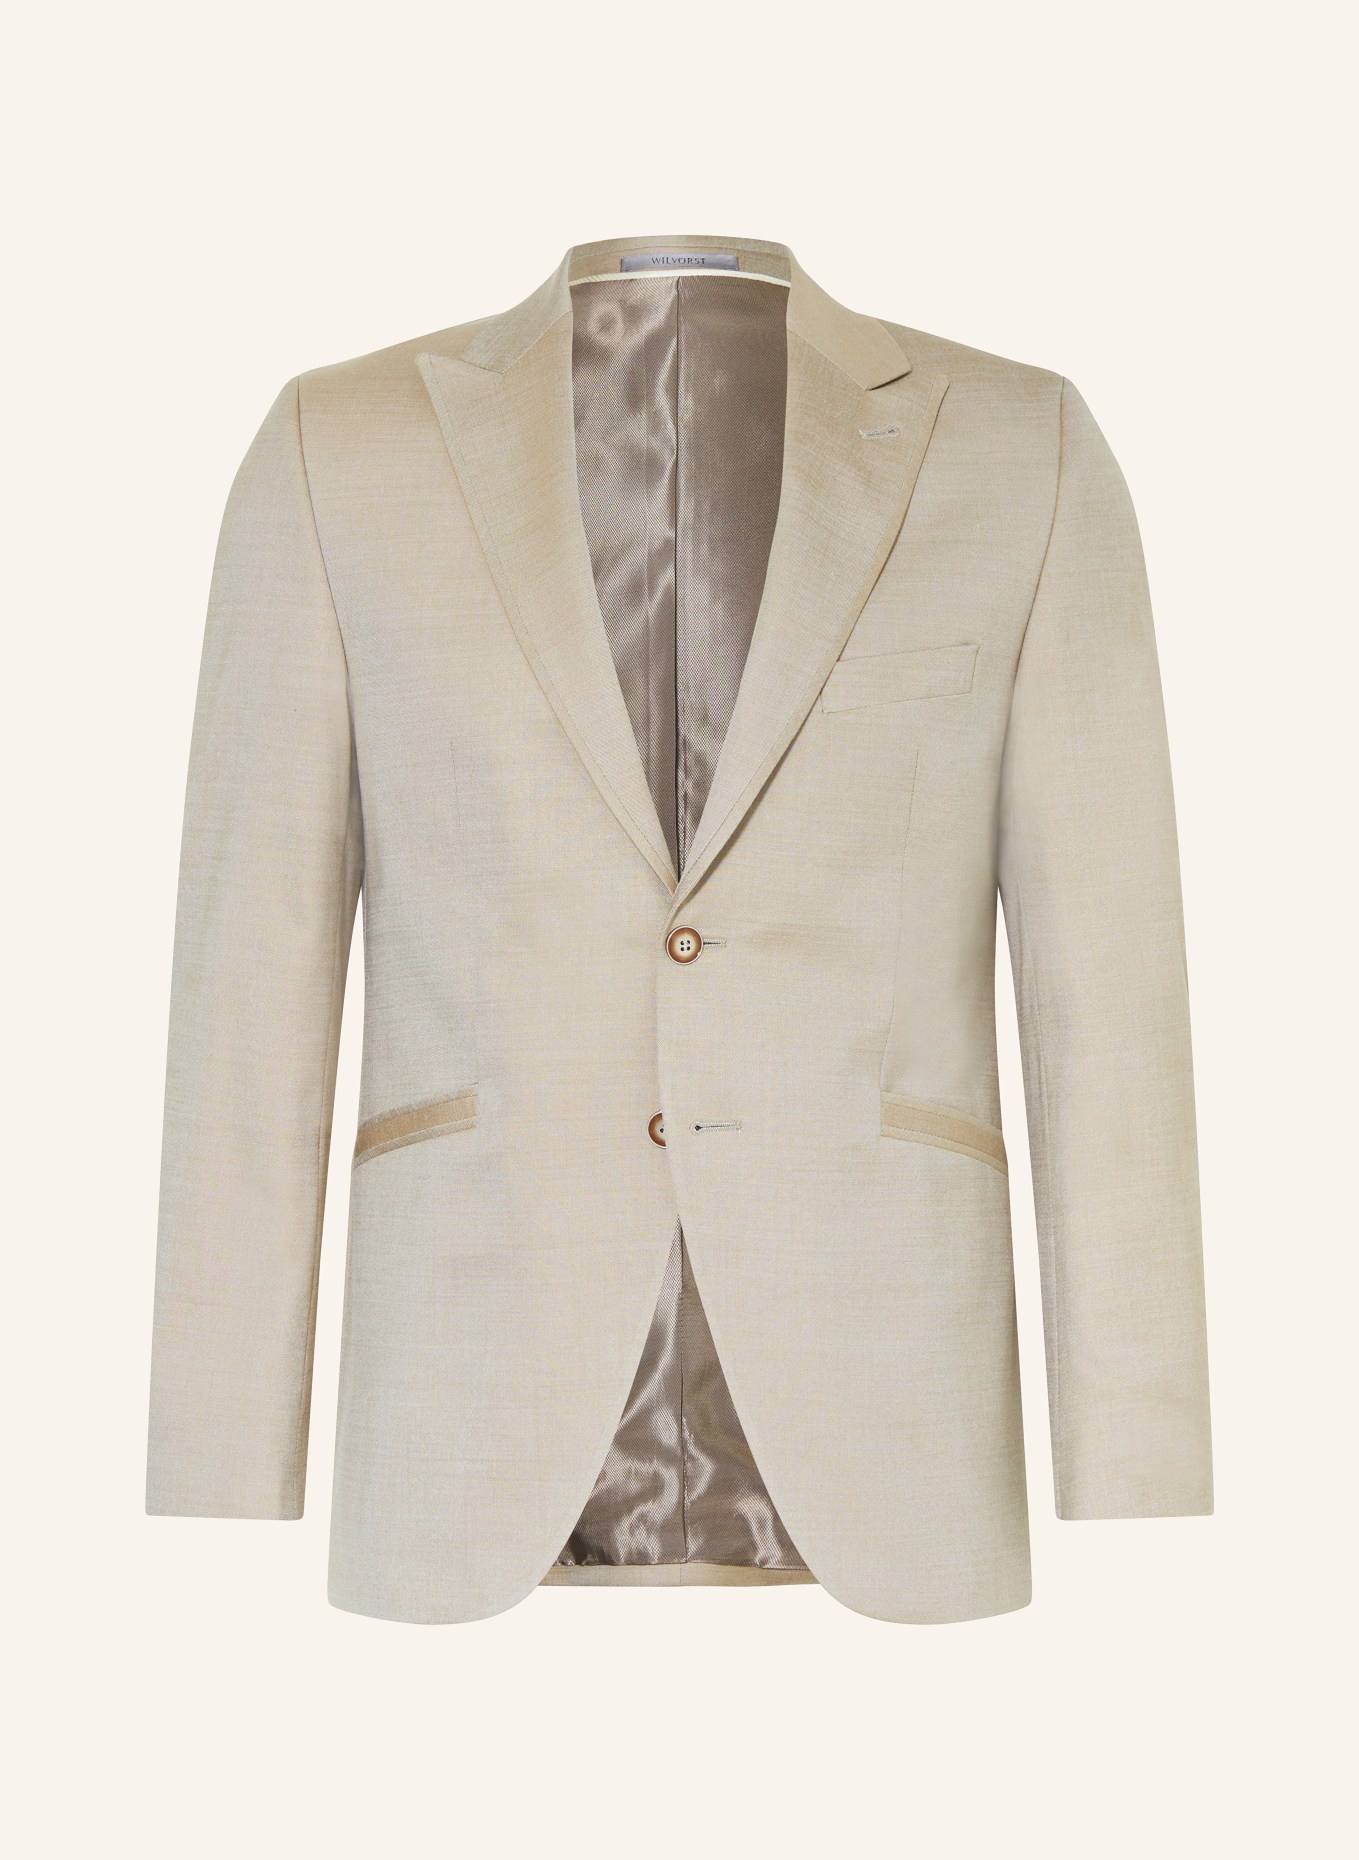 WILVORST Tailored jacket extra slim fit, Color: 068 Cappuccino (Image 1)